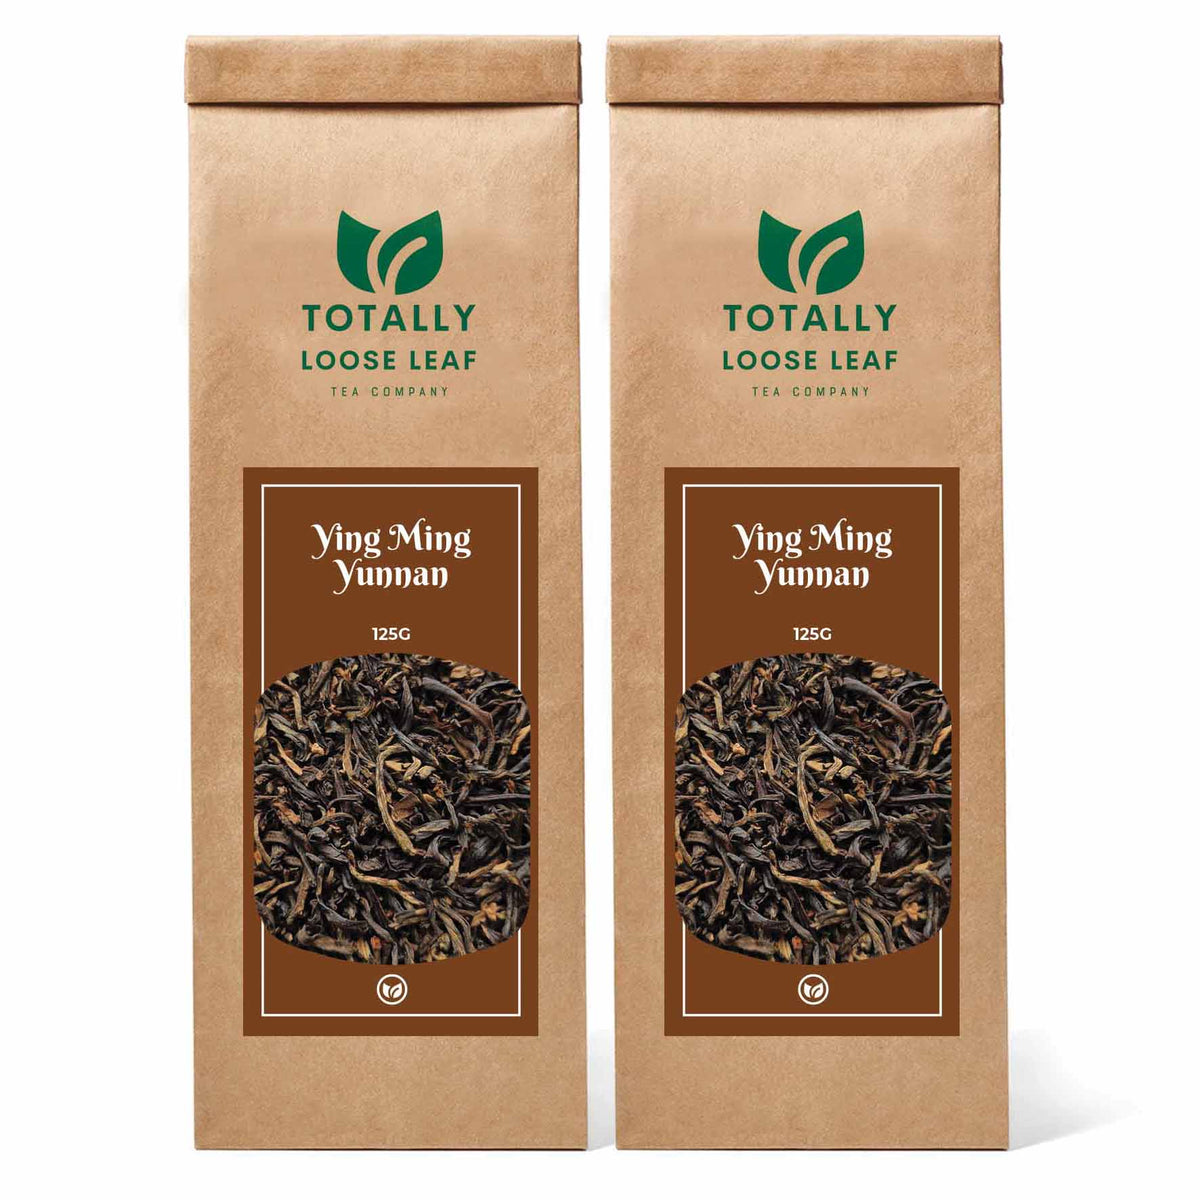 Ying Ming Yunnan Black Loose Leaf Tea - two pouches